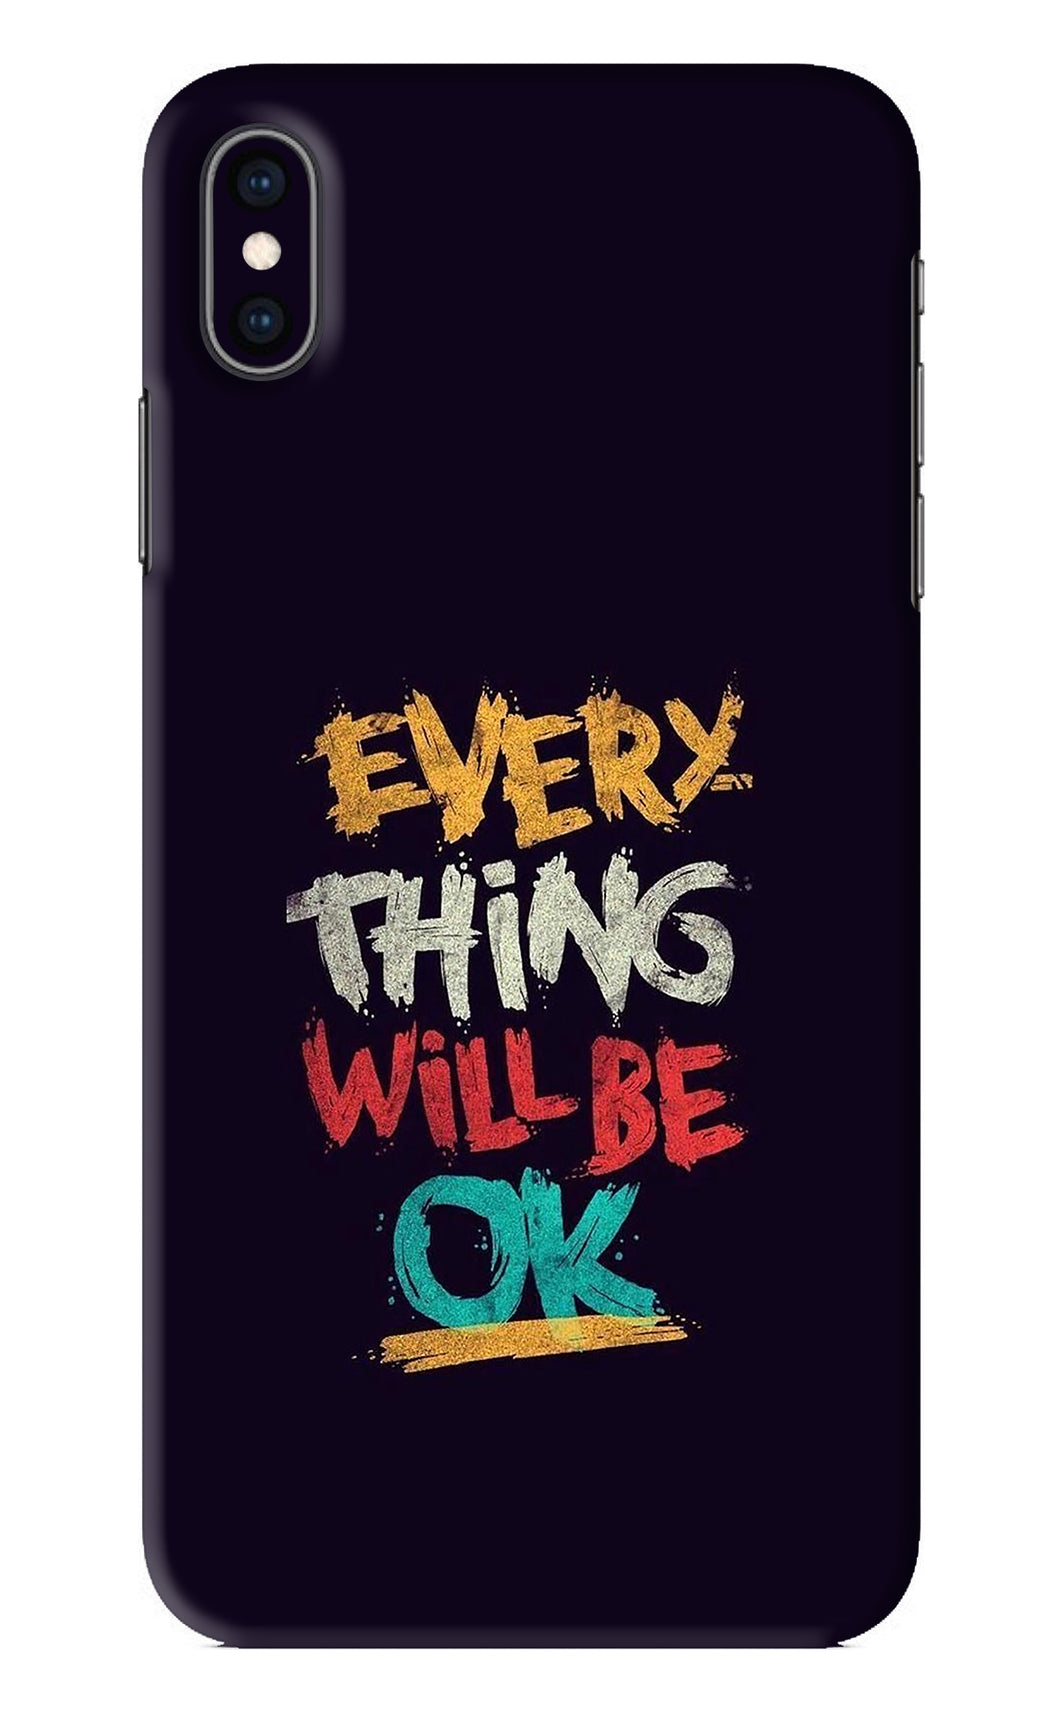 Everything Will Be Ok iPhone XS Max Back Skin Wrap